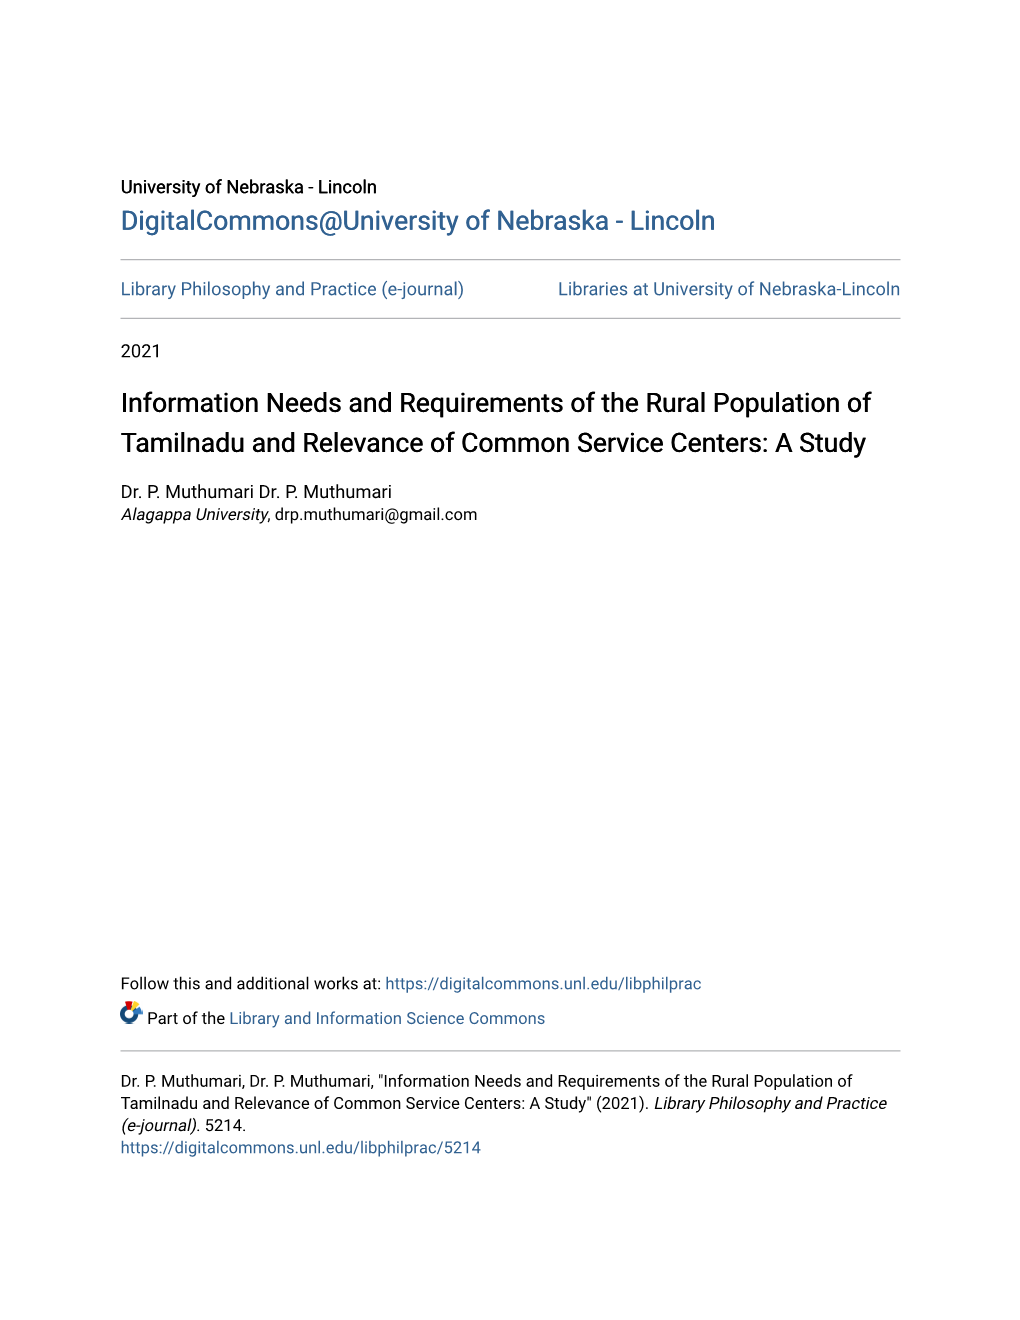 Information Needs and Requirements of the Rural Population of Tamilnadu and Relevance of Common Service Centers: a Study